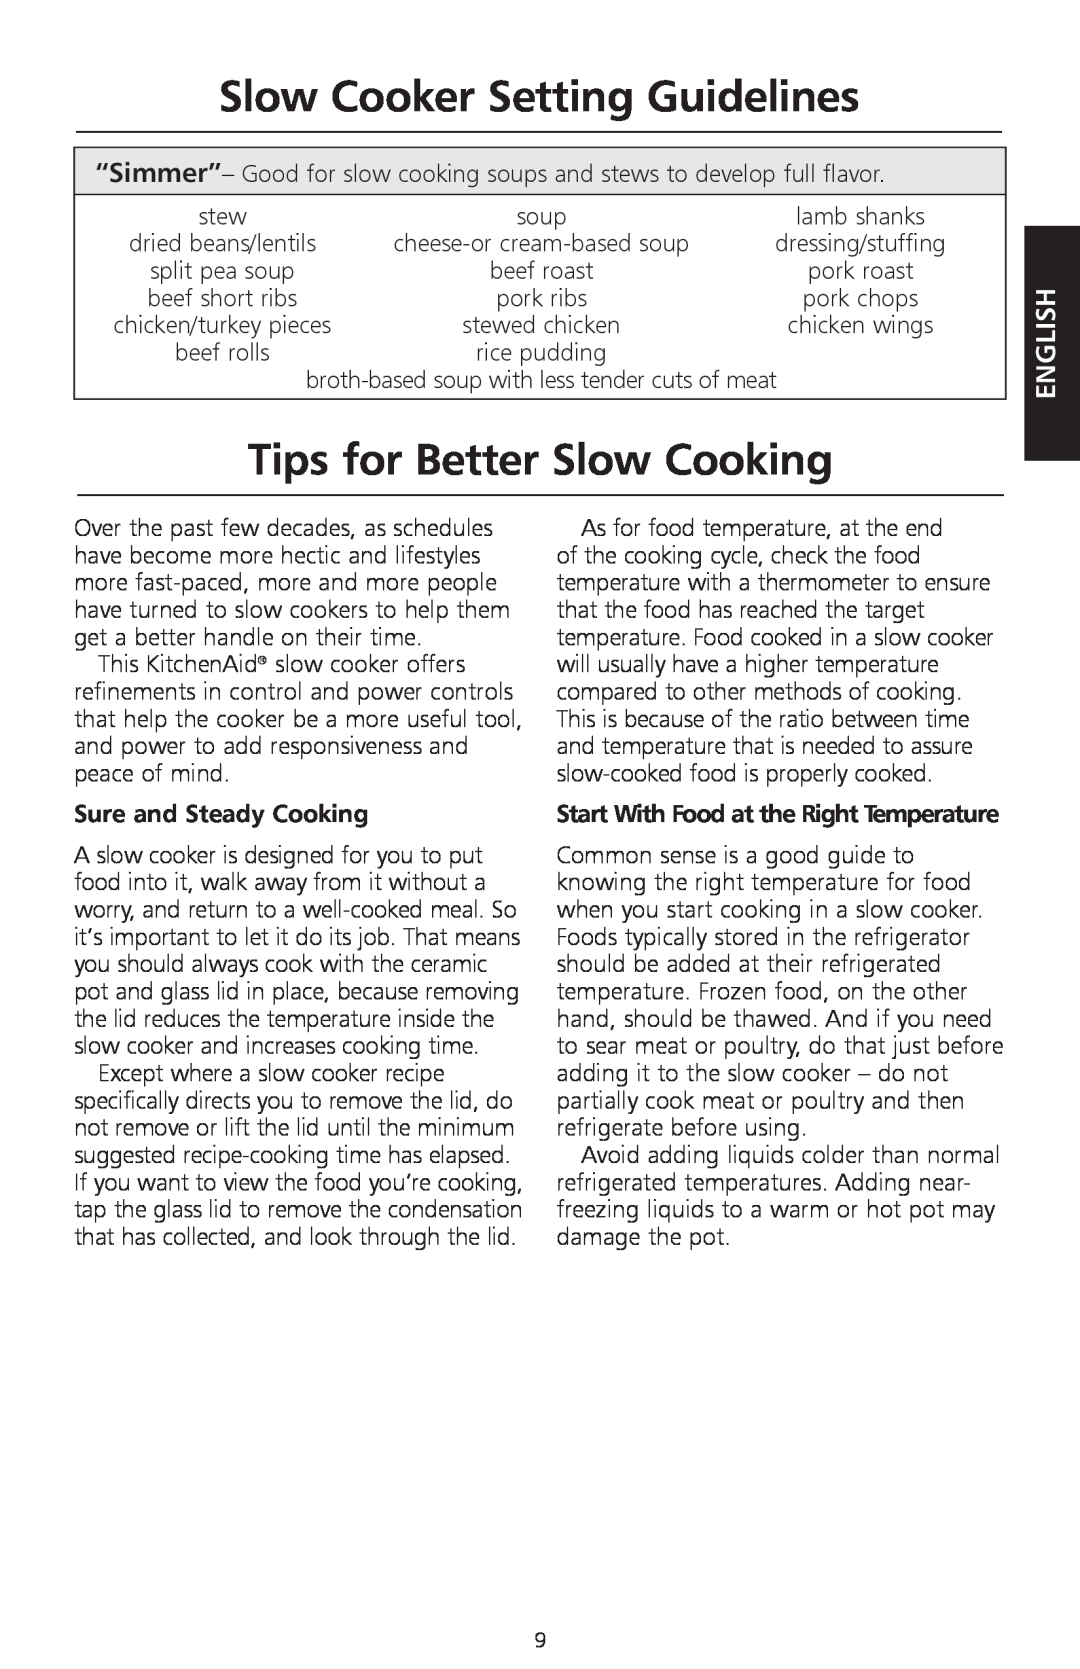 KitchenAid KSC700 manual Tips for Better Slow Cooking, Slow Cooker Setting Guidelines, English, Sure and Steady Cooking 